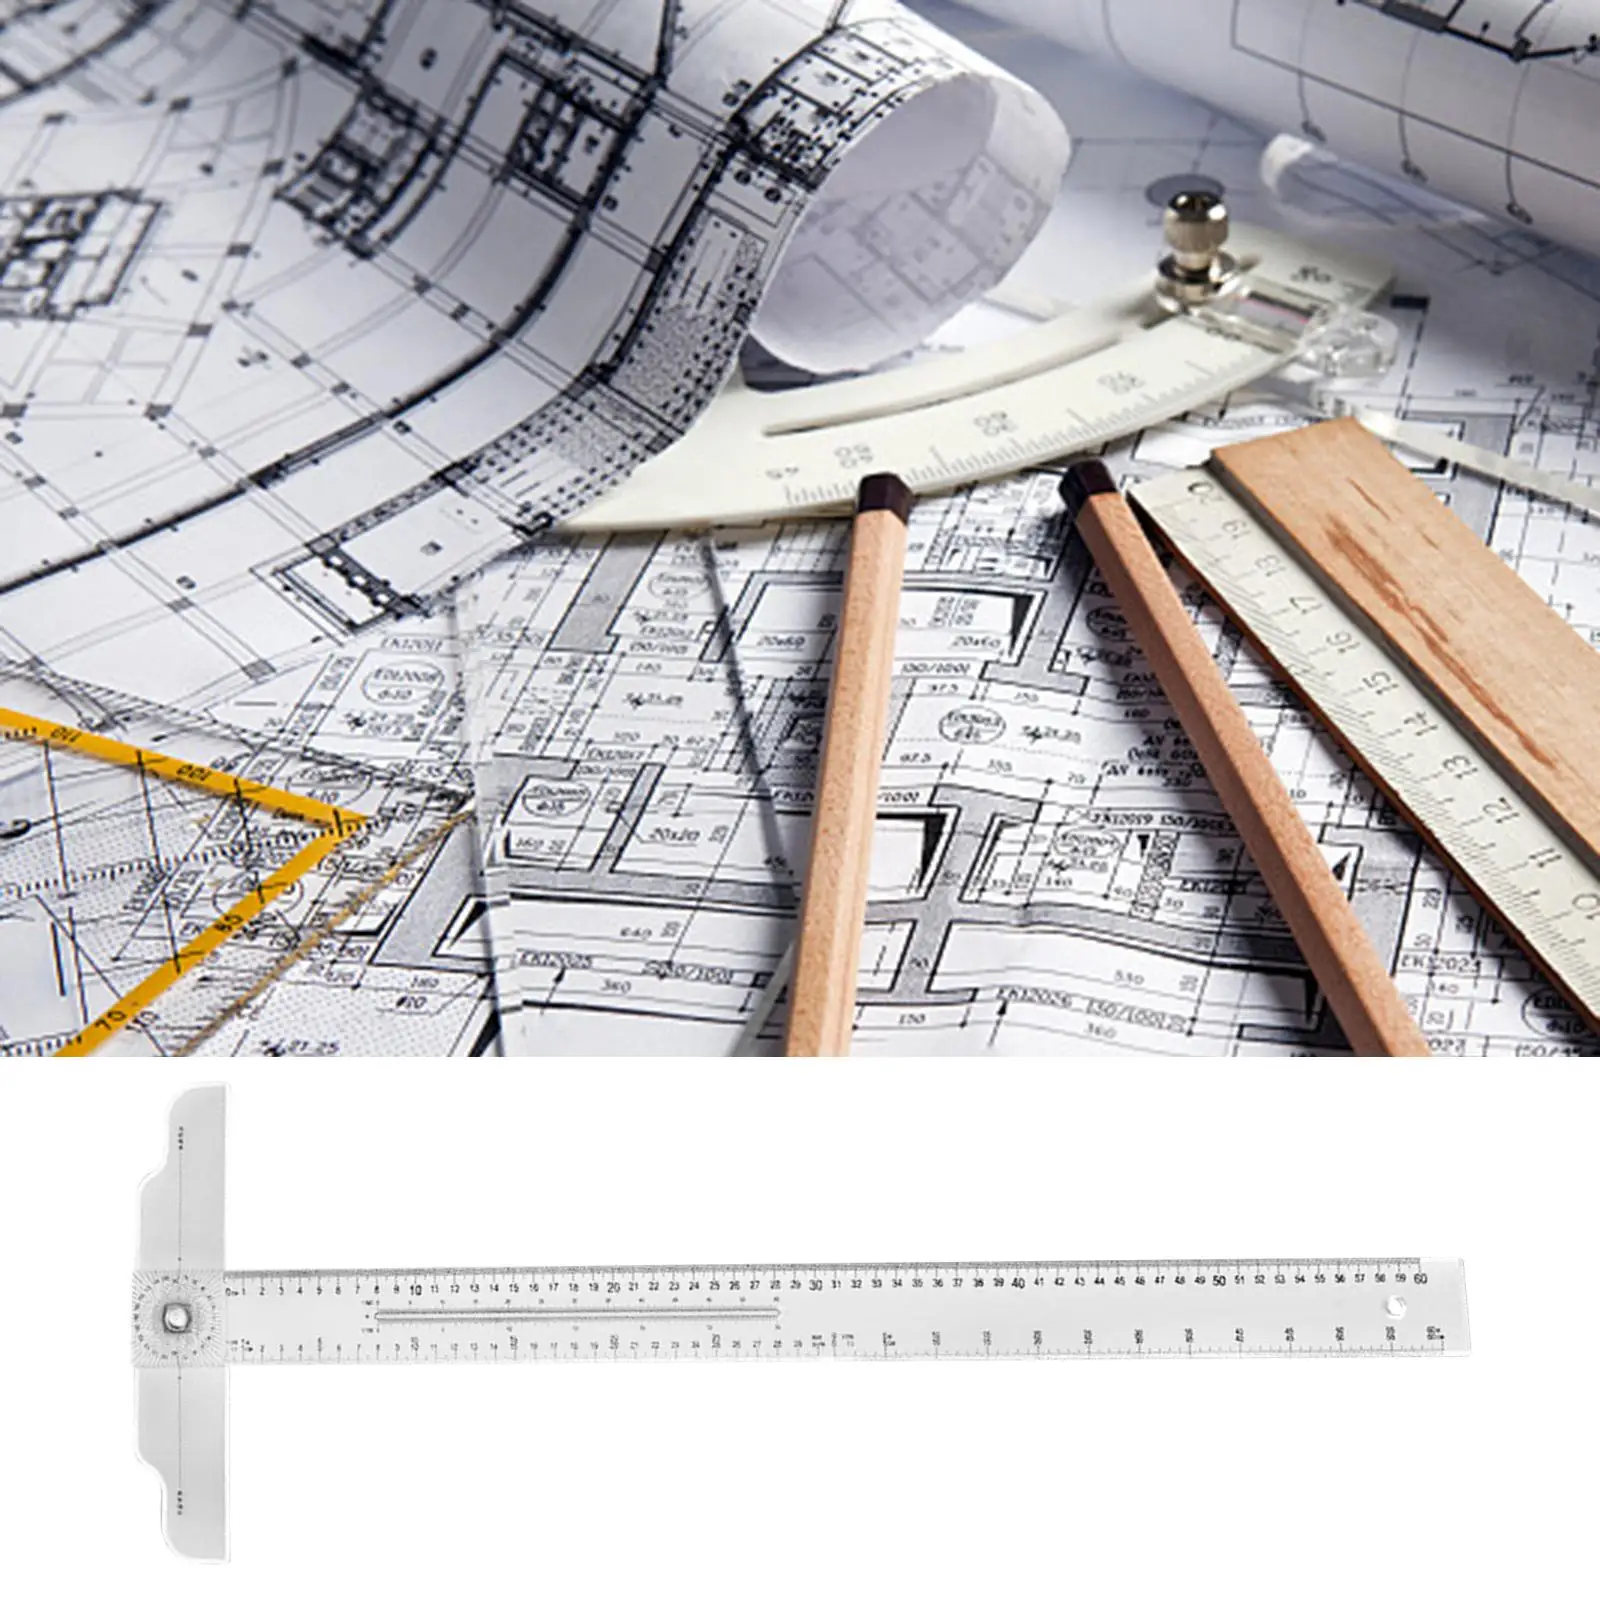 60cm T Square Ruler Rotating Transparent Angle Ruler Angle Measure Tool Multi Function for Woodworking Drafting Engineering